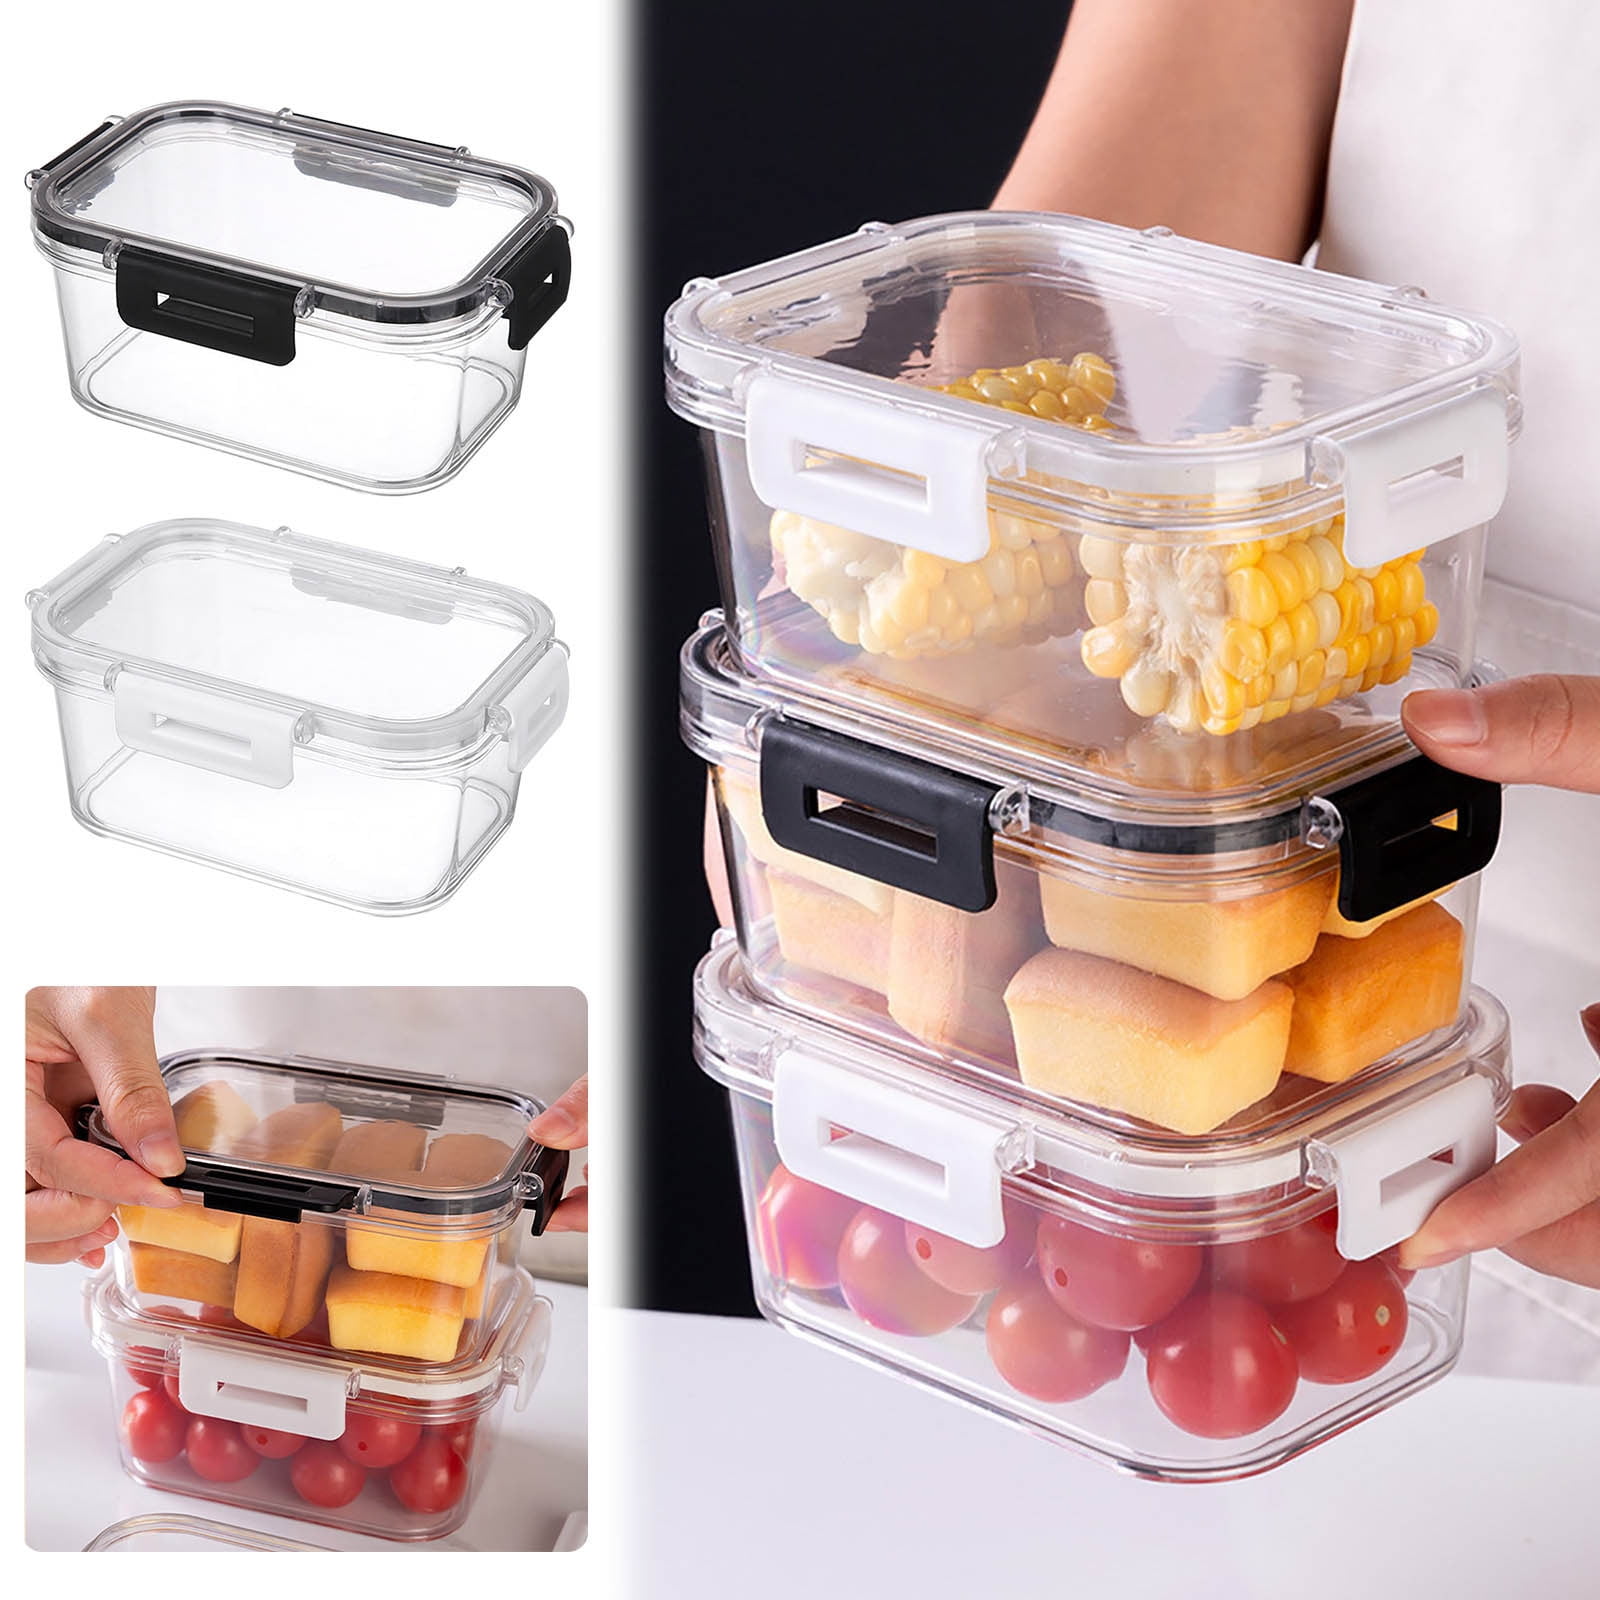 RTIC 5 Compartment Lunch Containers, Hot Food Container With Lid For  Adults, Microwave Safe Divided …See more RTIC 5 Compartment Lunch  Containers, Hot